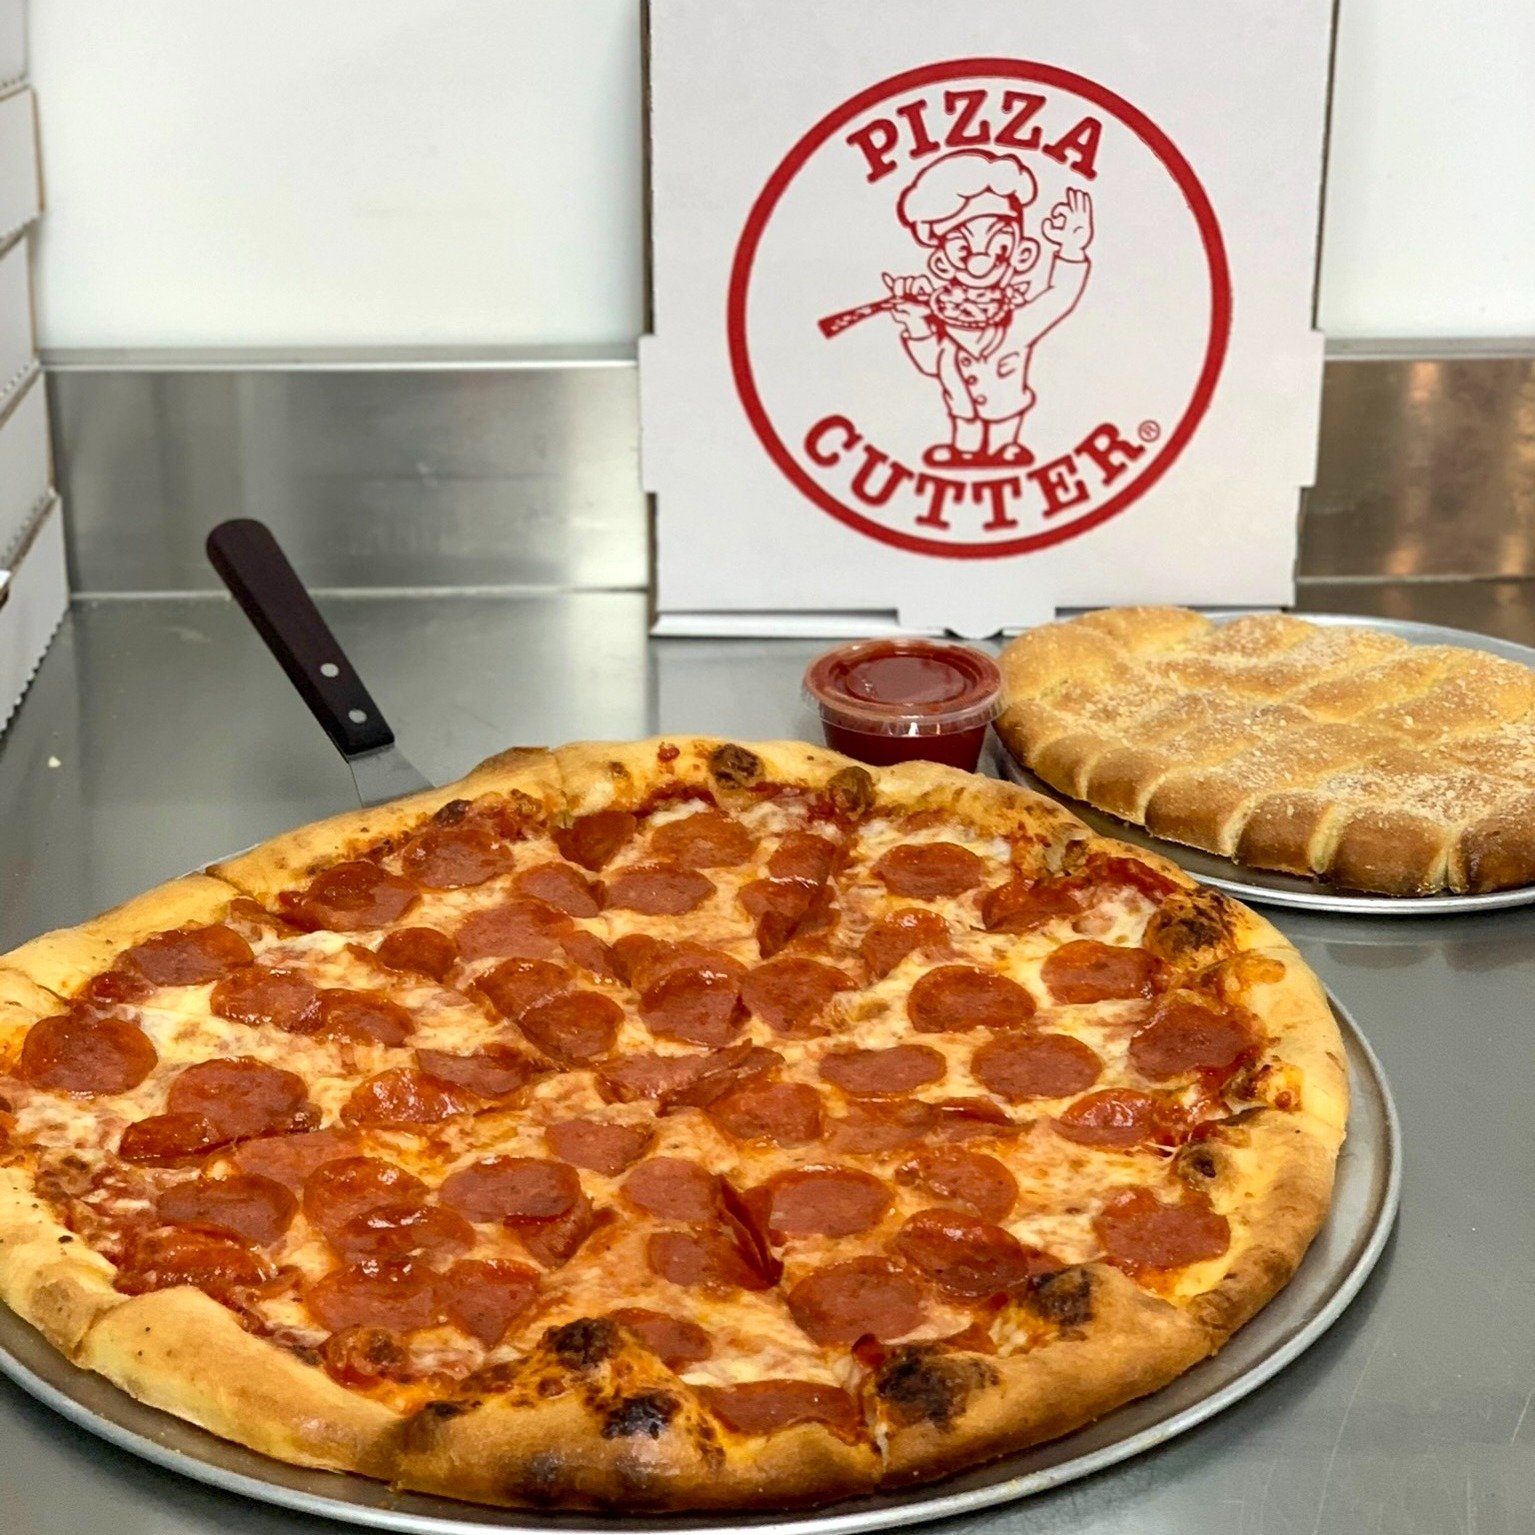 Pepperoni pizza and garlic stix: a classic combination that never disappoints ❤️😍🍕

 #northvillemichigan #pizza #northvillemi #puremichigan #supportsmallbusiness #eatlocal #supportlocalbusiness #supportlocal